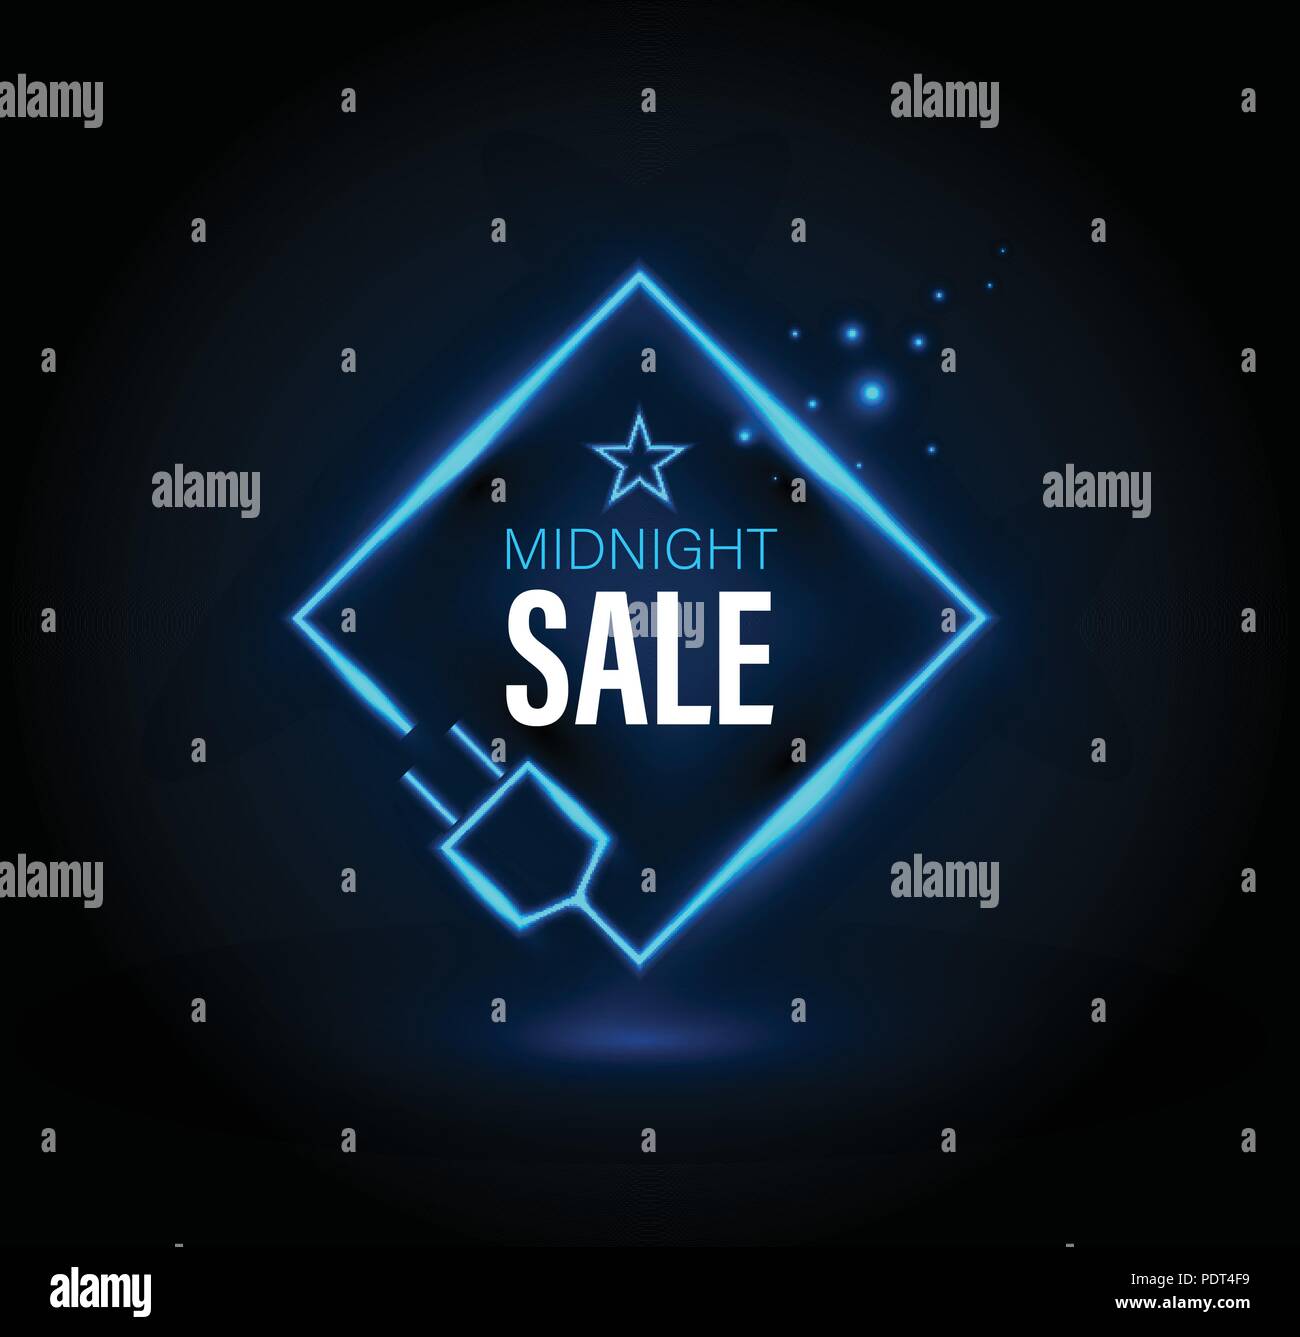 Midnight sale banner with plug. Vector illustration for promotion advertising. Stock Vector